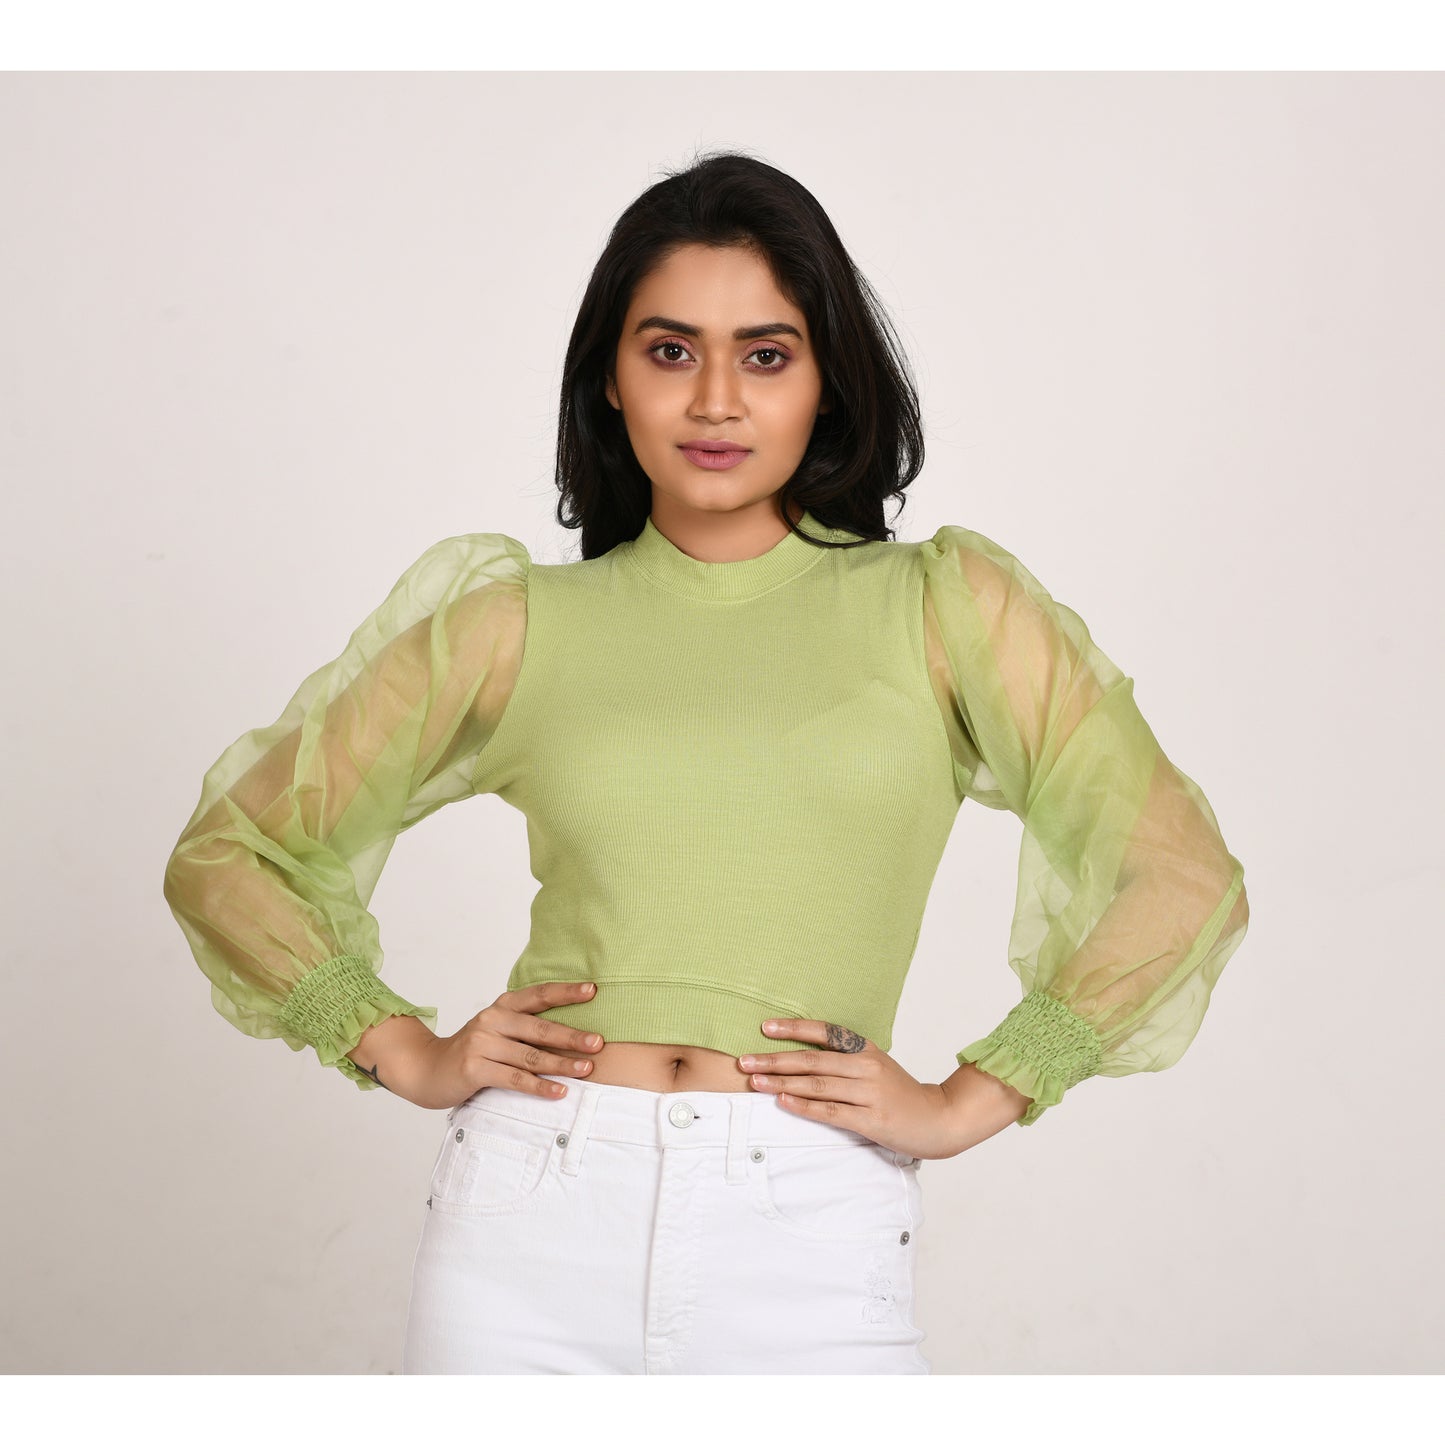 Hosiery Blouses with Puffy Organza Full Sleeves -  Lime Green - Blouse featured